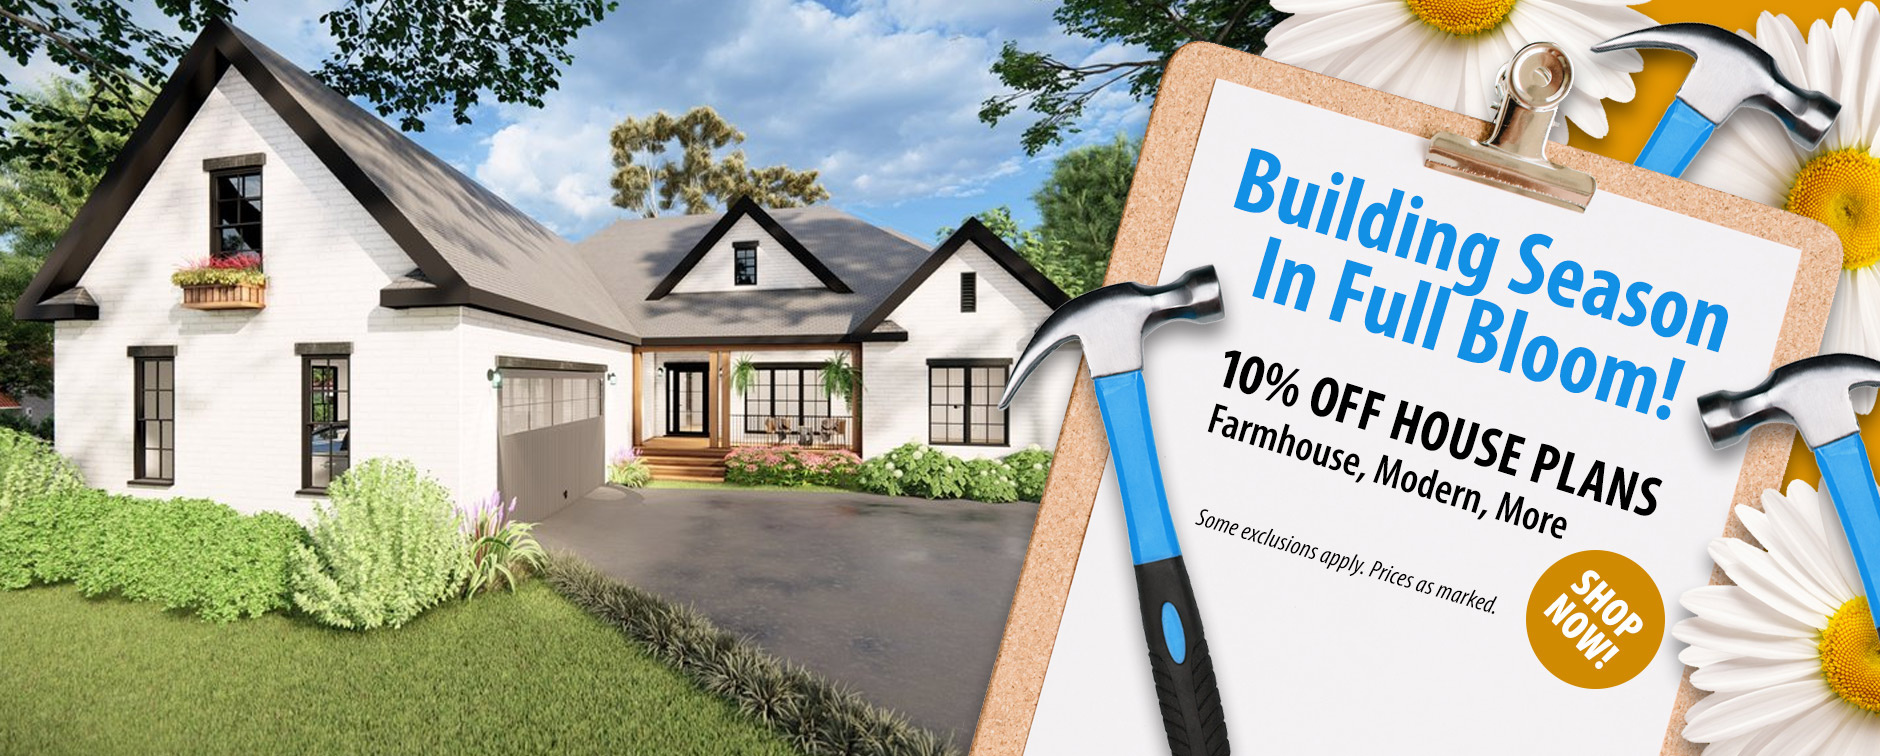 Shop the Spring Planning Event and Get 10% Off House Plans